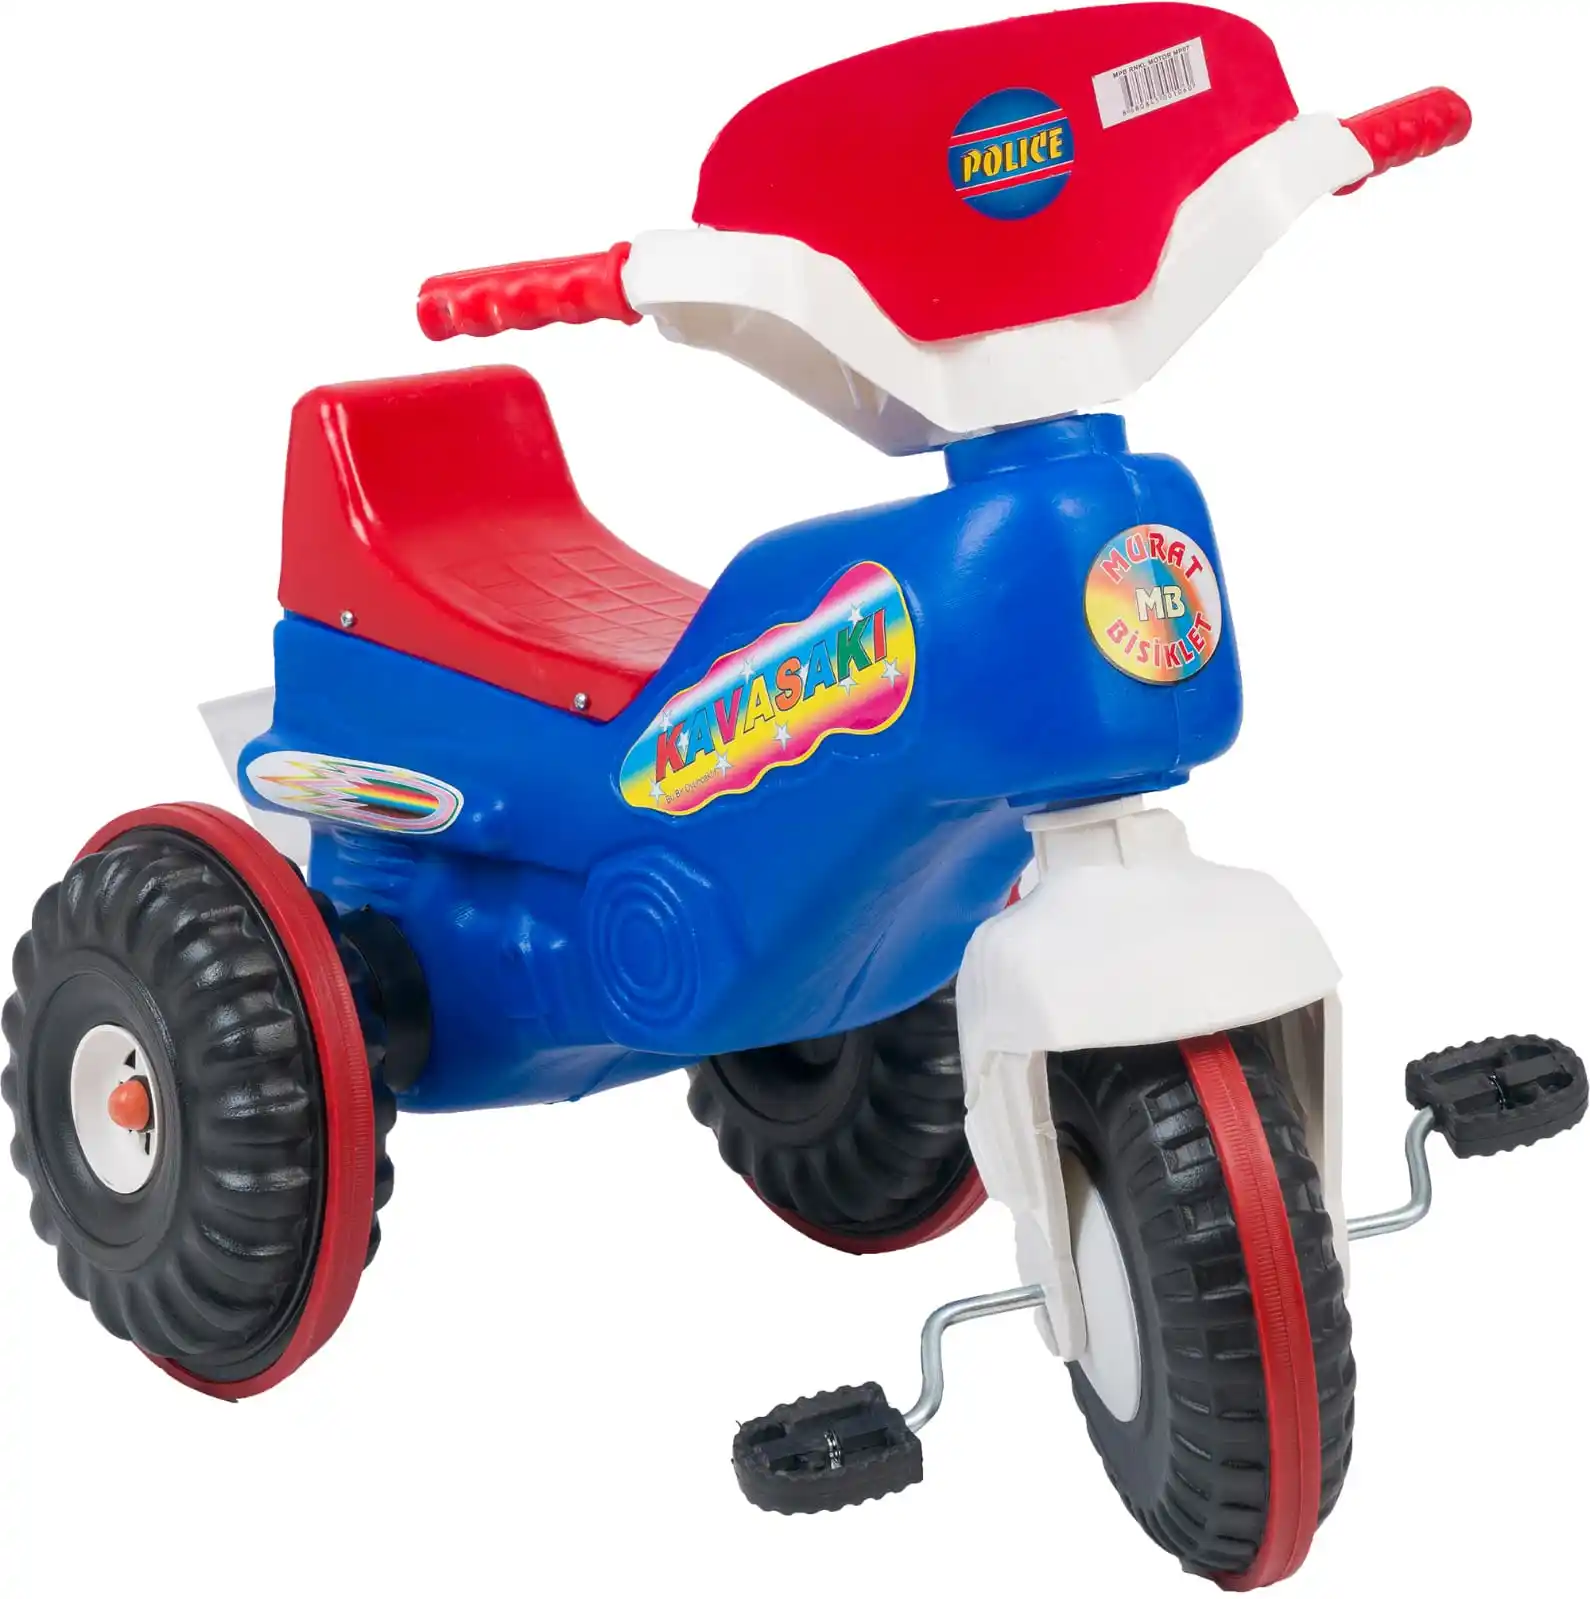 Kids Tricycle Car Toys for Kids Baby Red Toy White Blue Style Suit Plastic Material Origin Cheap Kids Plastic Bike 3 Wheels Bike